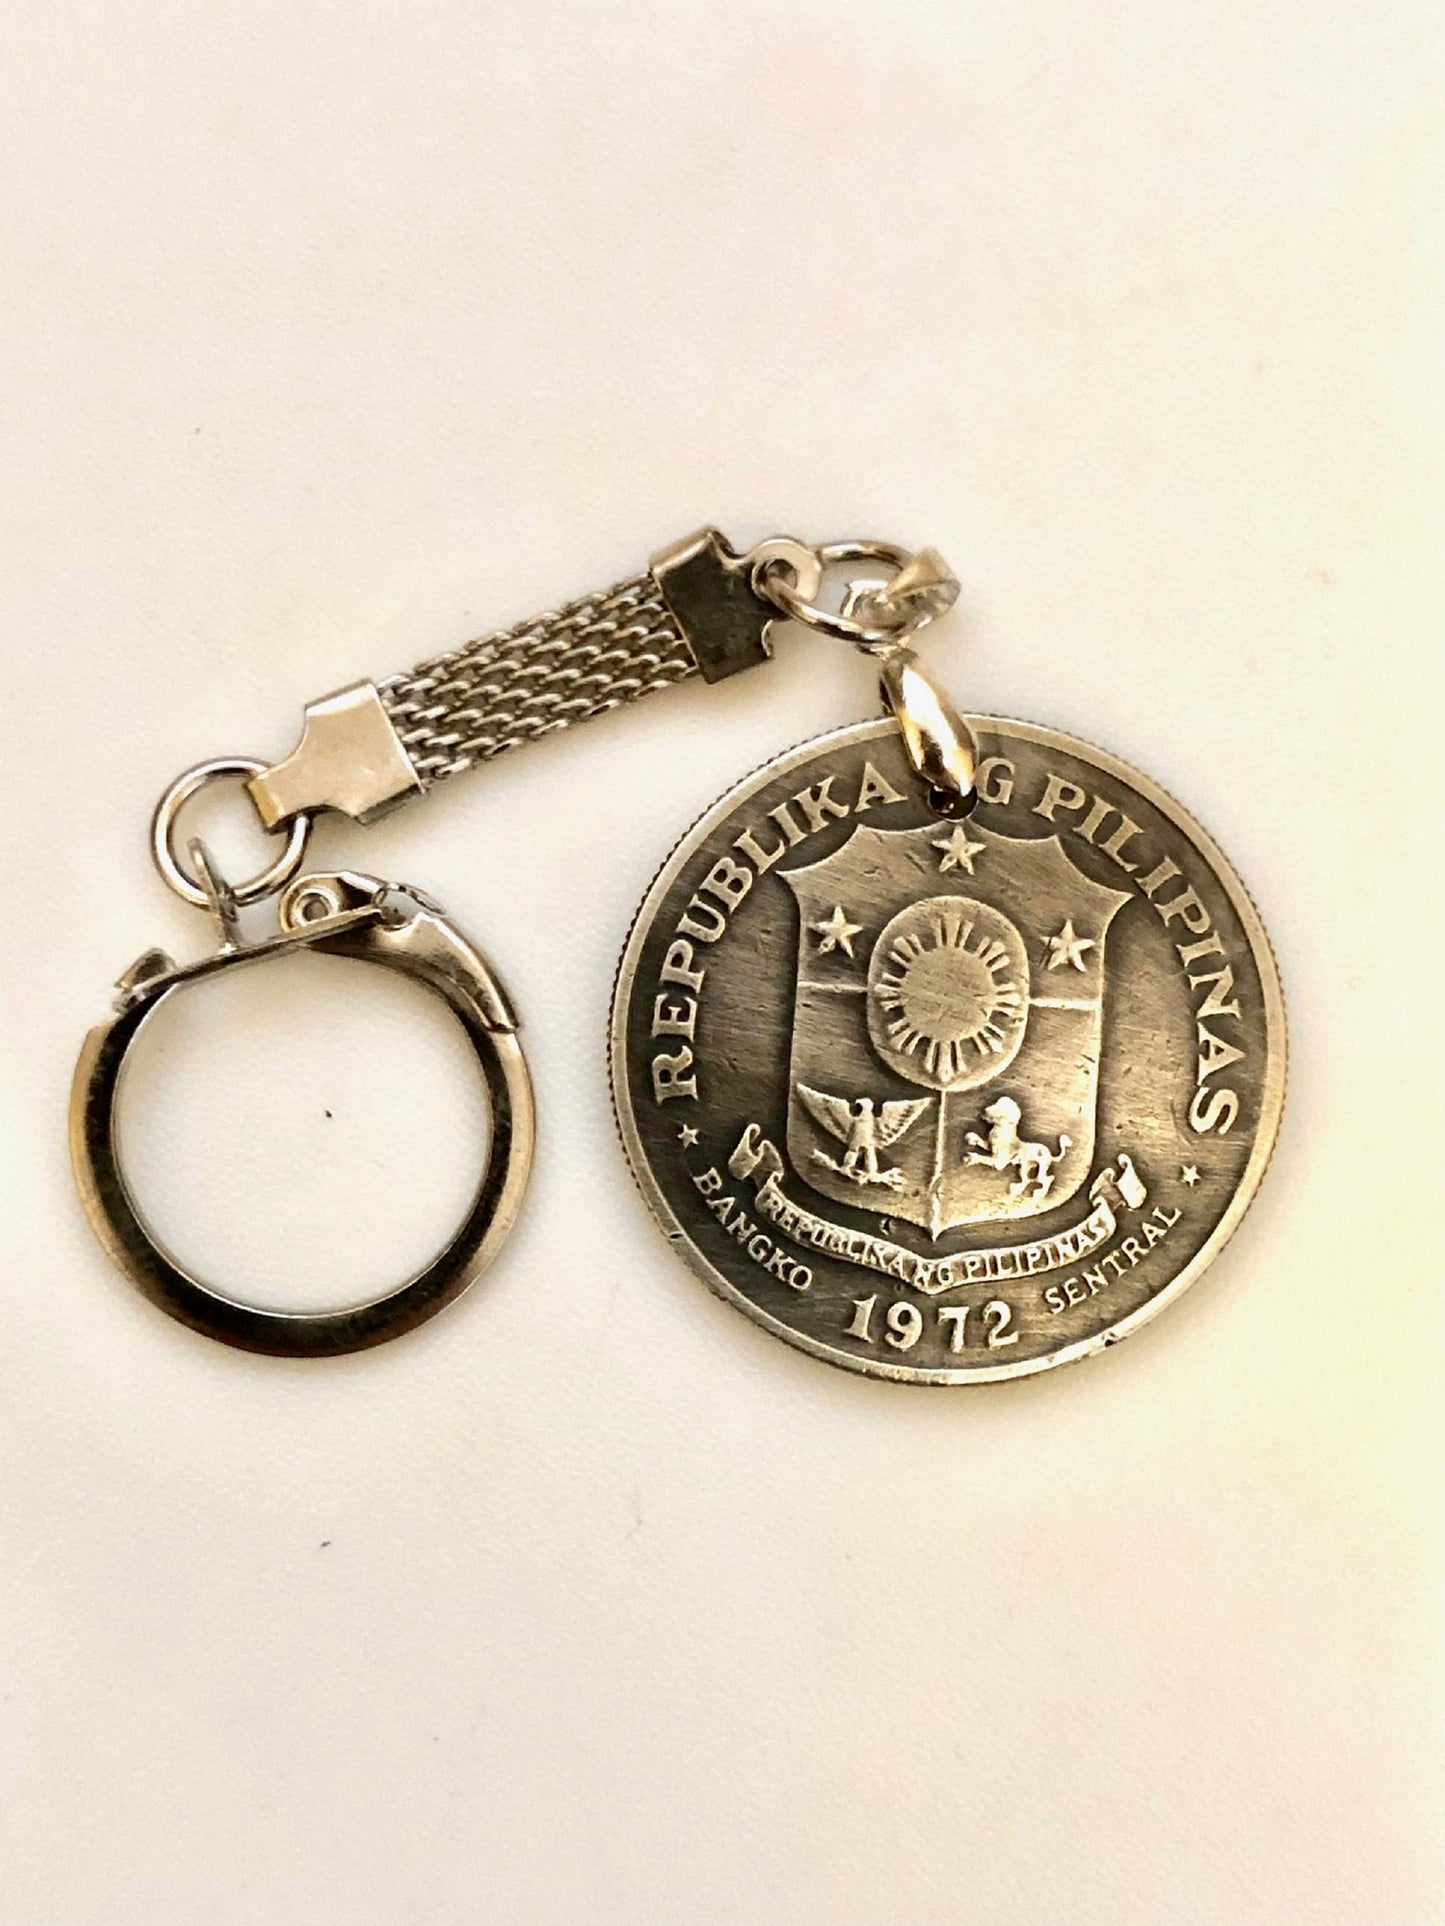 Philippines Coin Keychain 1 Piso Republika Ng Pilipinas Personal Necklace Vintage Jewelry Gift Friend Charm For Him Her World Coin Collector